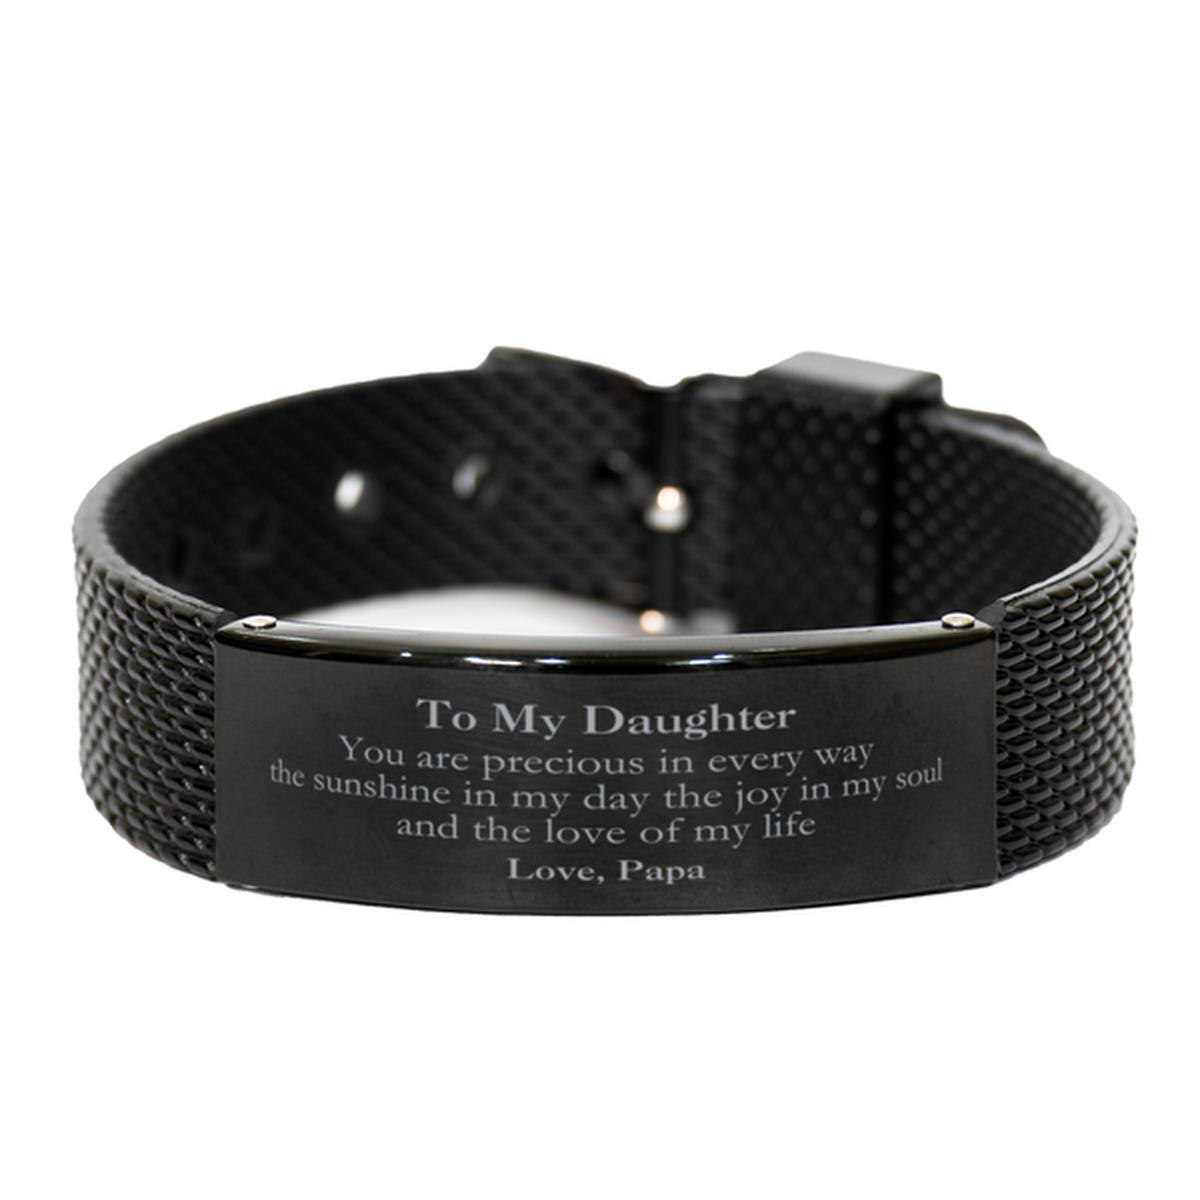 Graduation Gifts for Daughter Black Shark Mesh Bracelet Present from Papa, Christmas Daughter Birthday Gifts Daughter You are precious in every way the sunshine in my day. Love, Papa